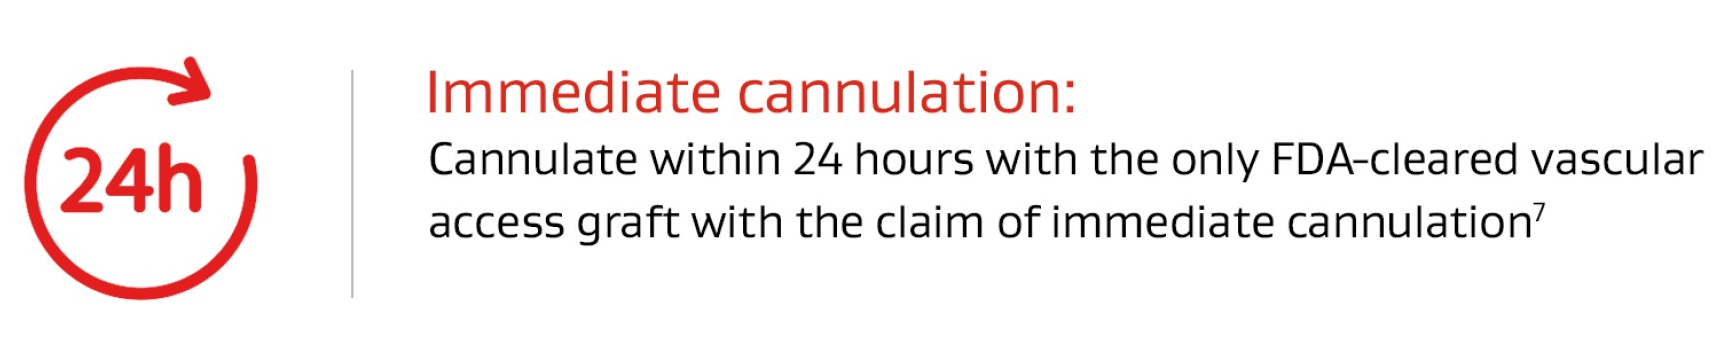 24 hour Immediate Cannulation: Cannulate within 24 hours with the only FDA-cleared vascular access graft with the claim of immediate cannulation